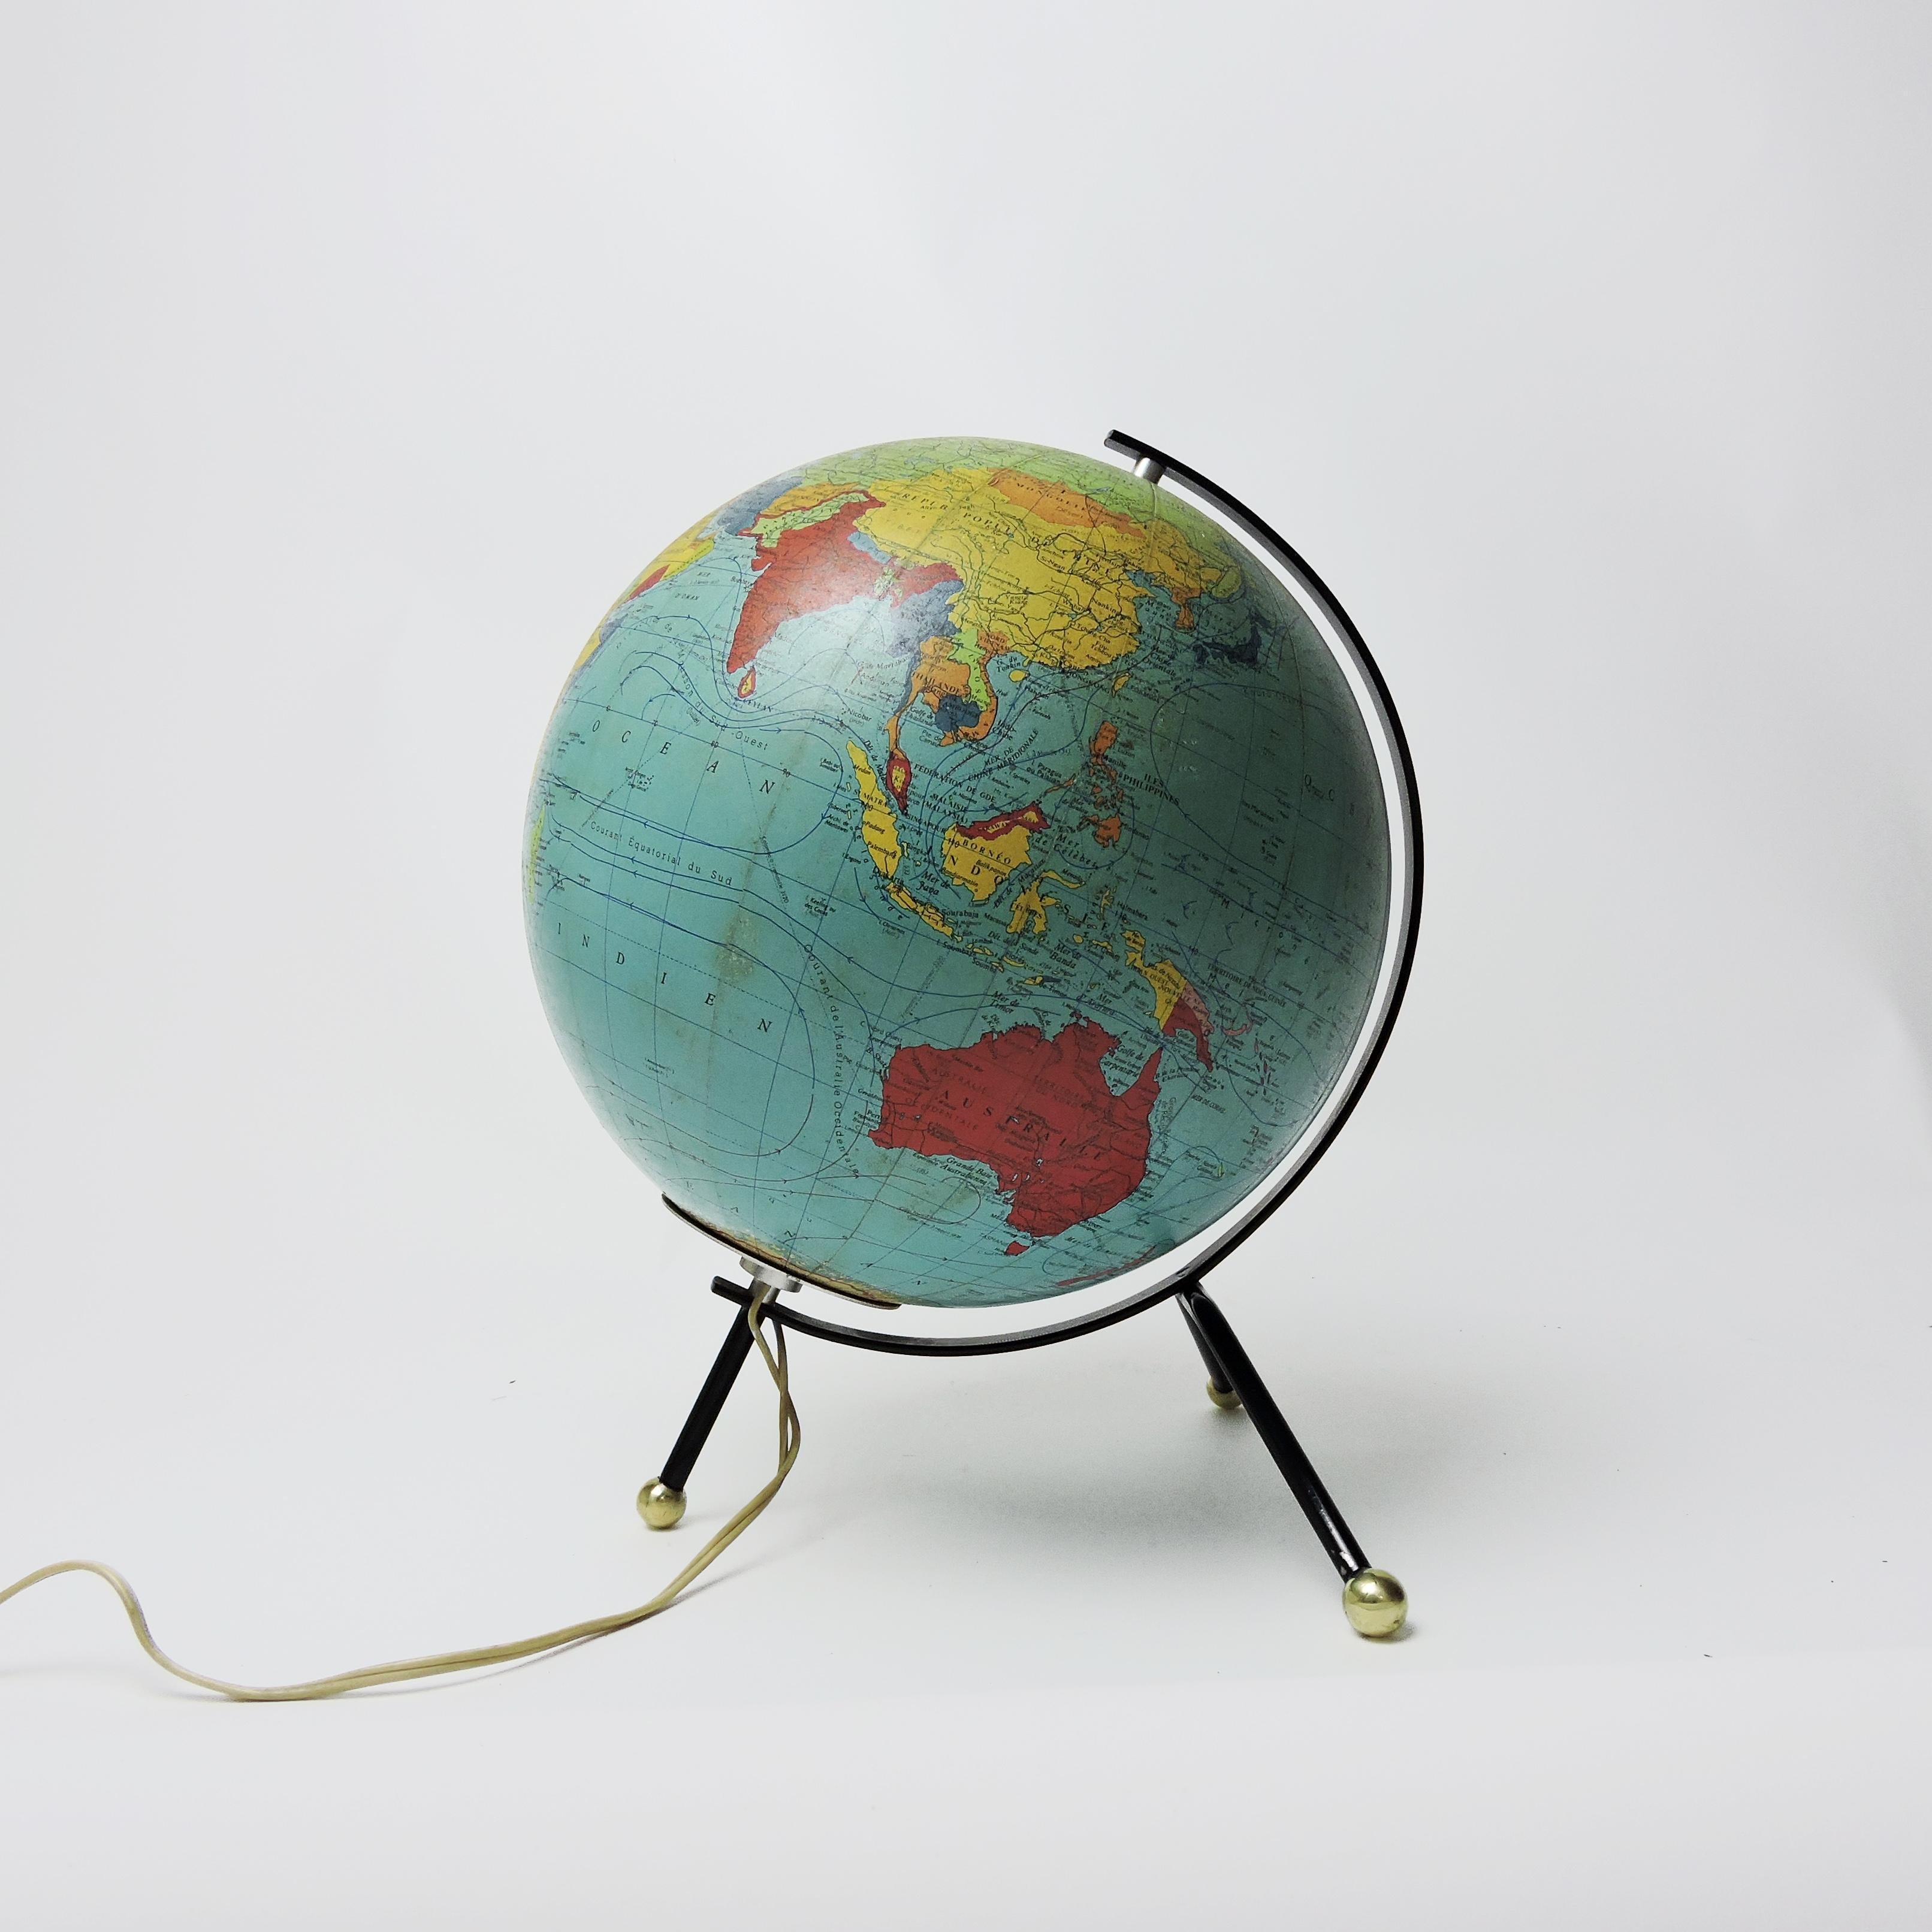 Metal Vintage Tripod Glowing Earth Globe by Cartes Taride, 1966 For Sale